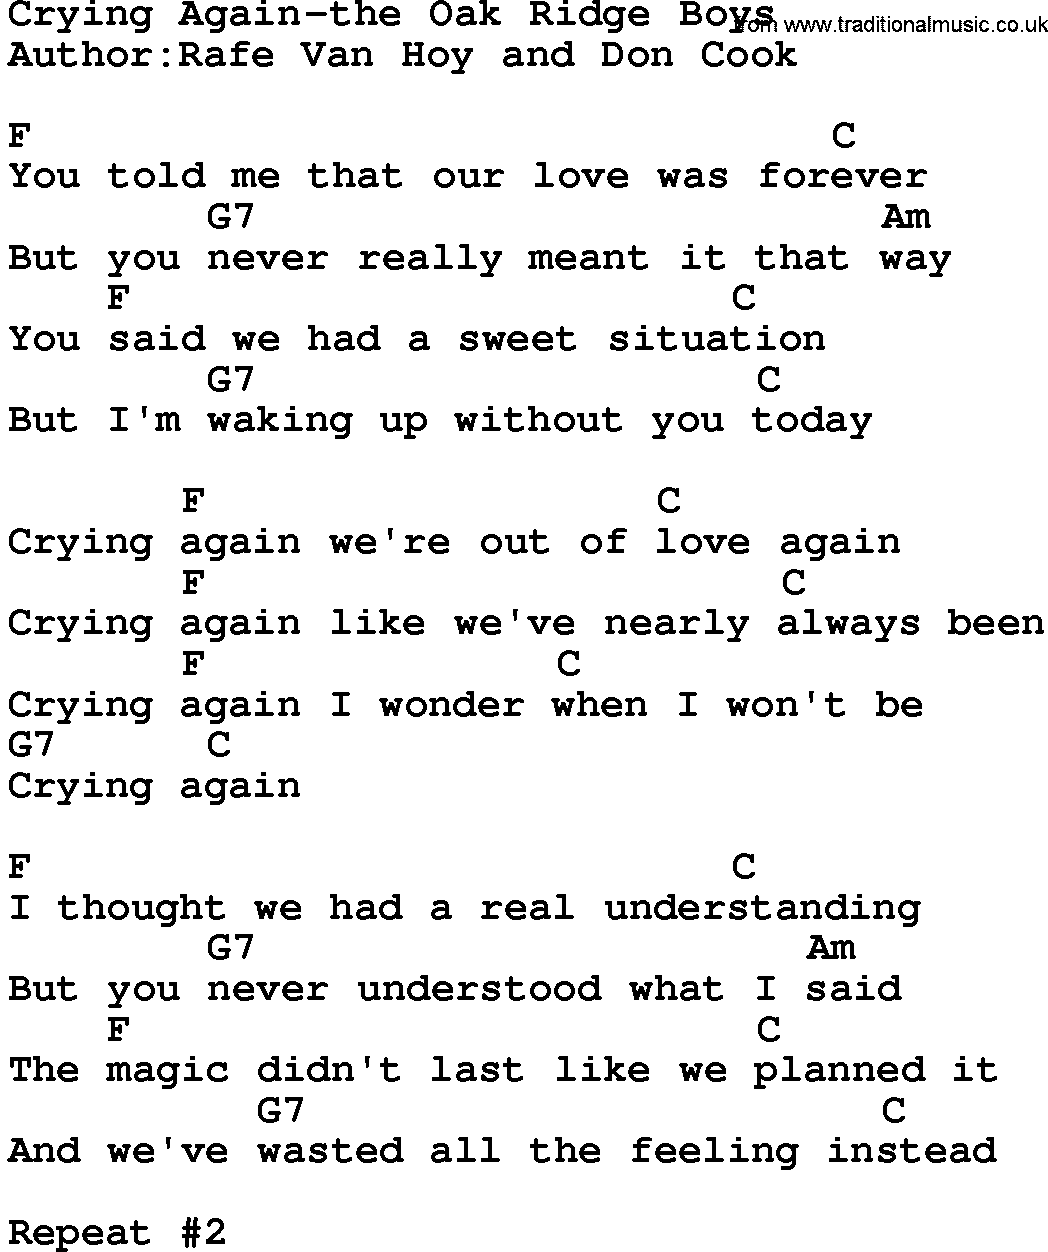 Country music song: Crying Again-The Oak Ridge Boys lyrics and chords